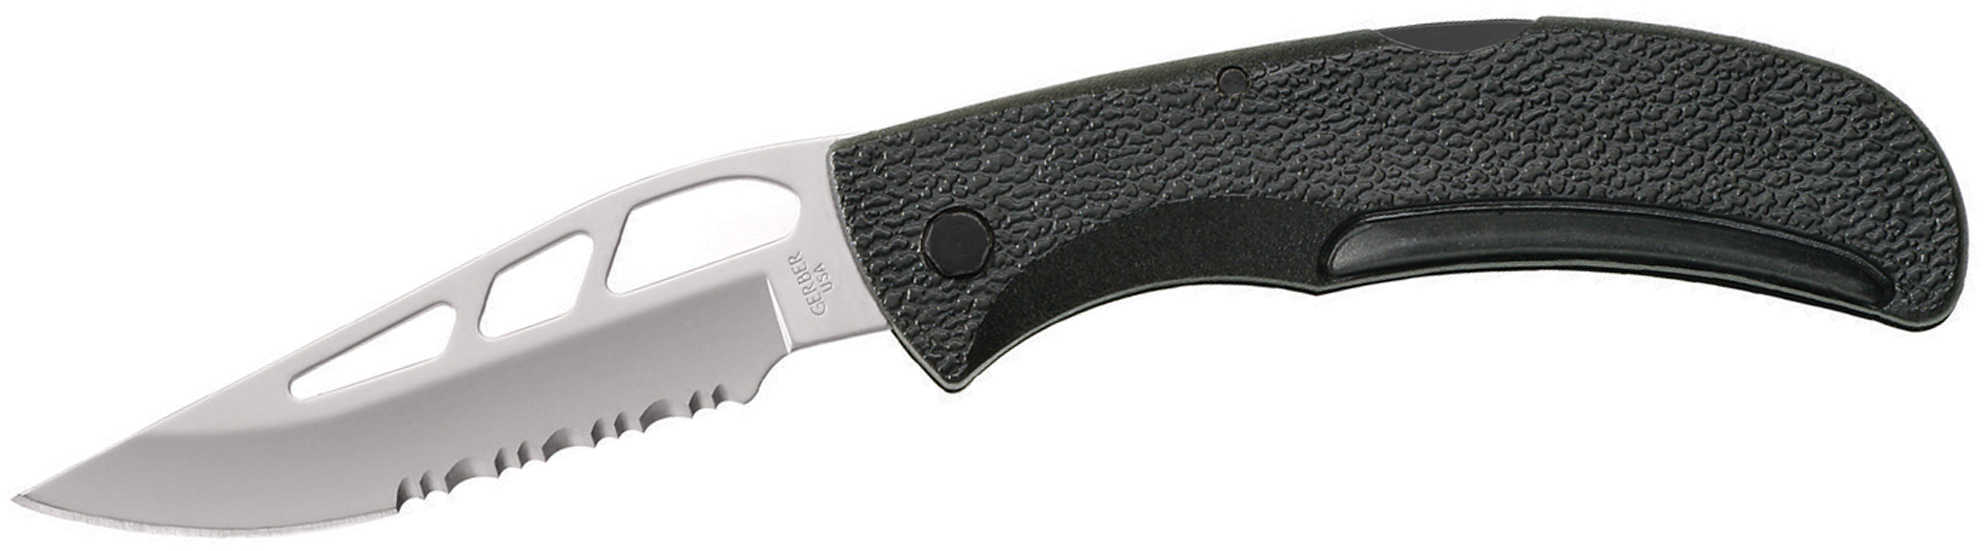 Gerber Folding Knife With Partially Serrated Clip Point Blade Md: 06751